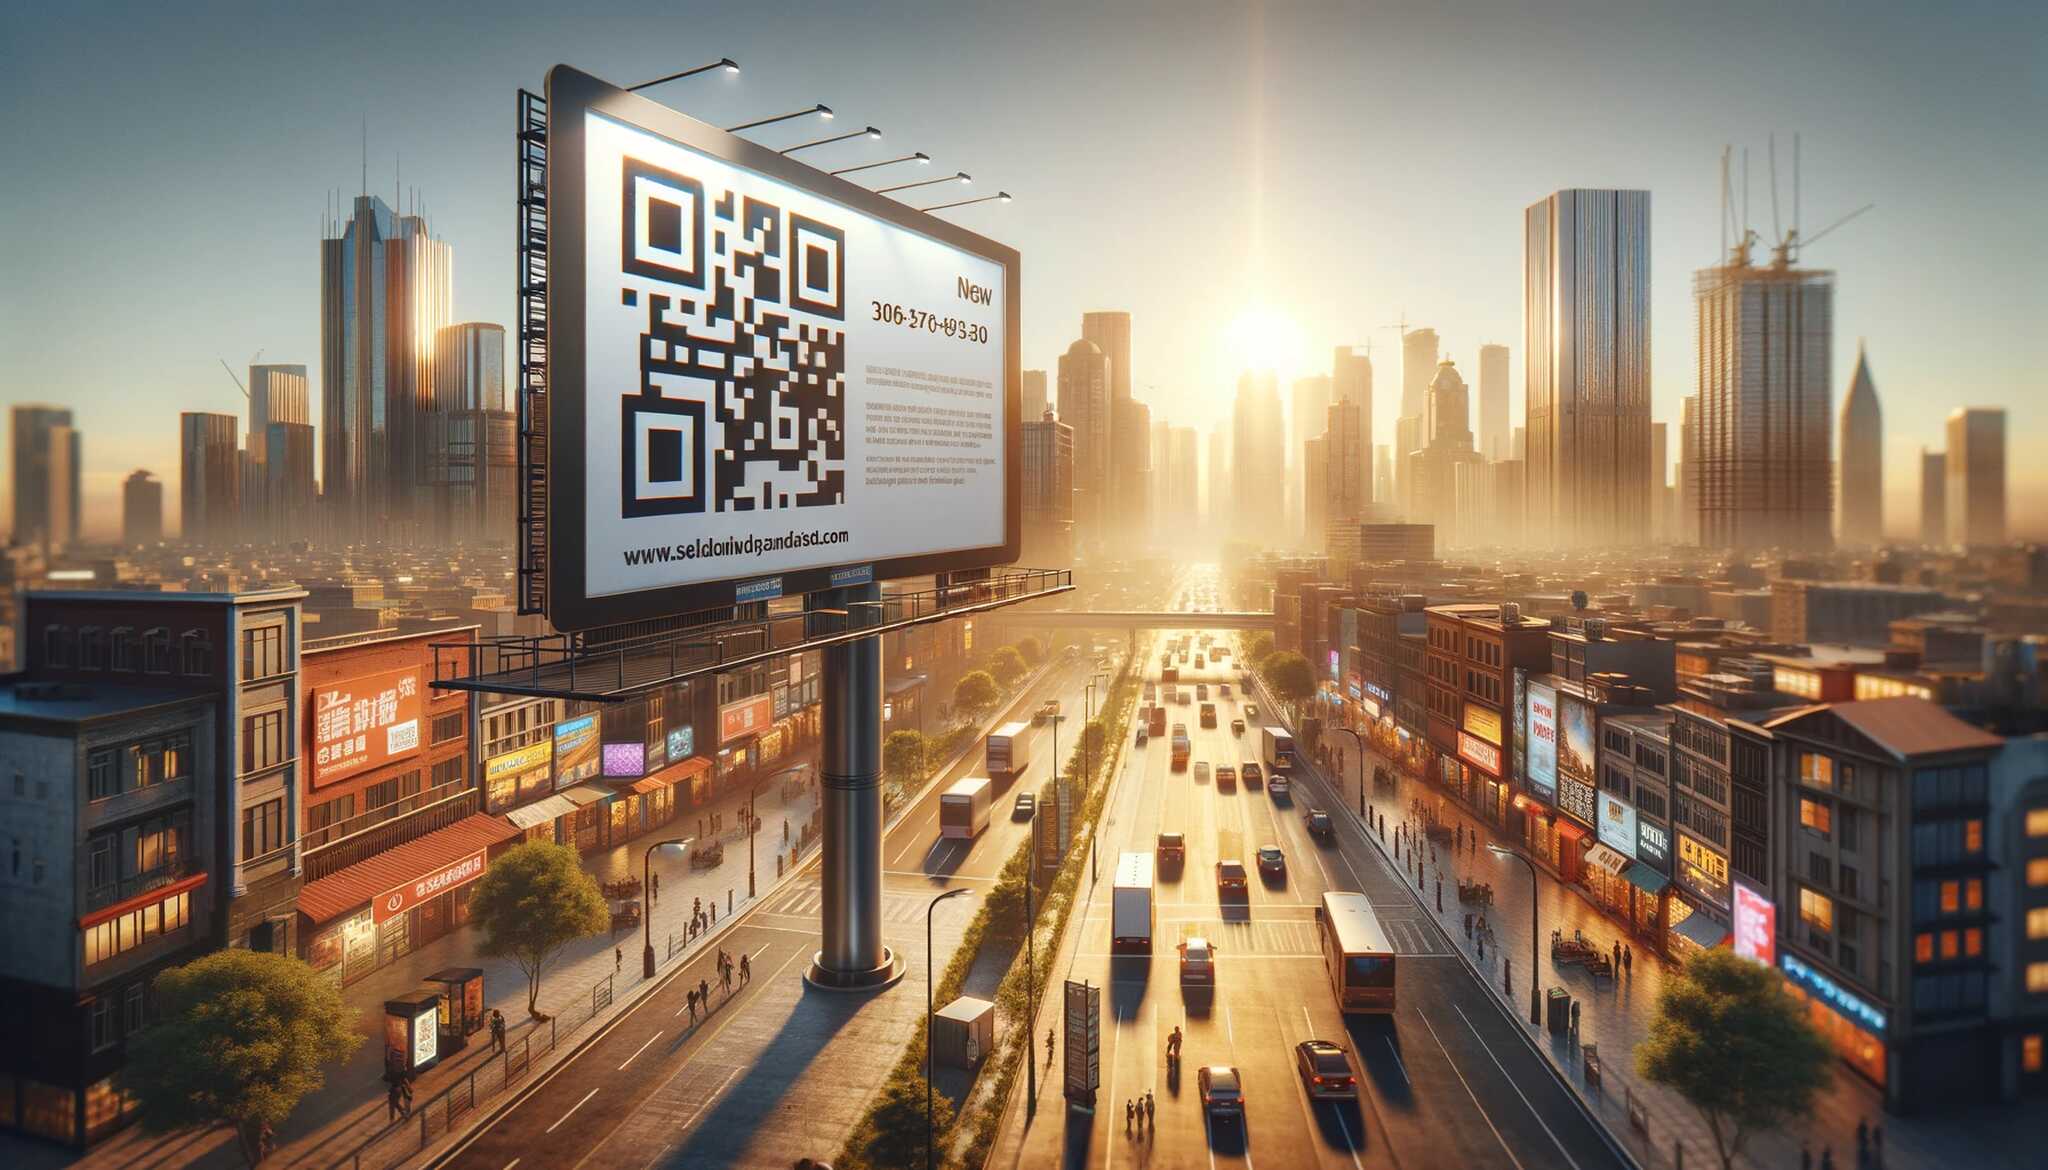 QR code on billboard within an urban setting and a busy road behind